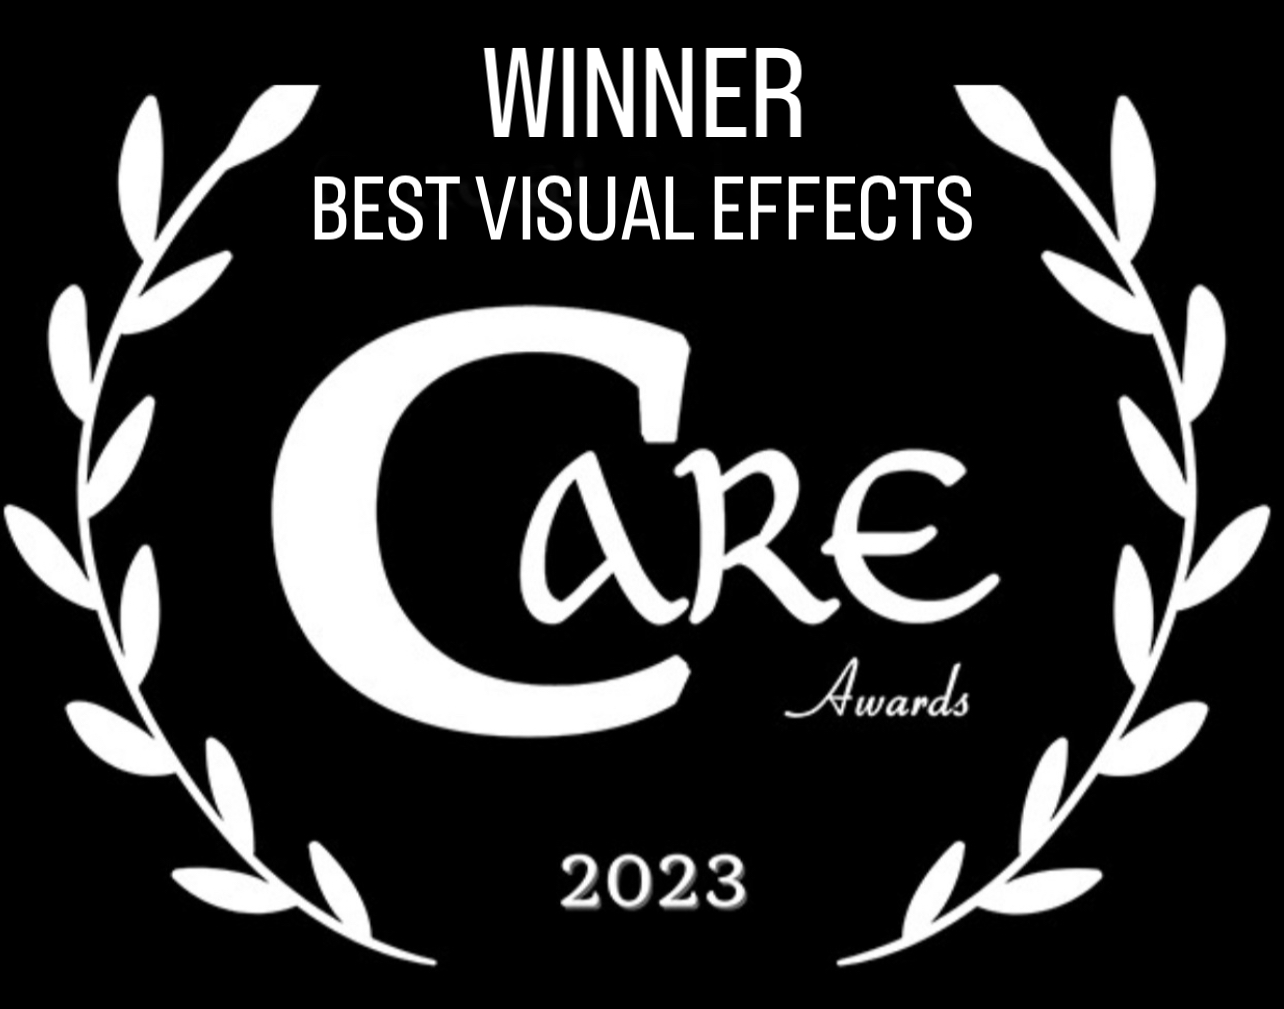 CARE Movie Awards Best Visual Effects LOVED The Movie